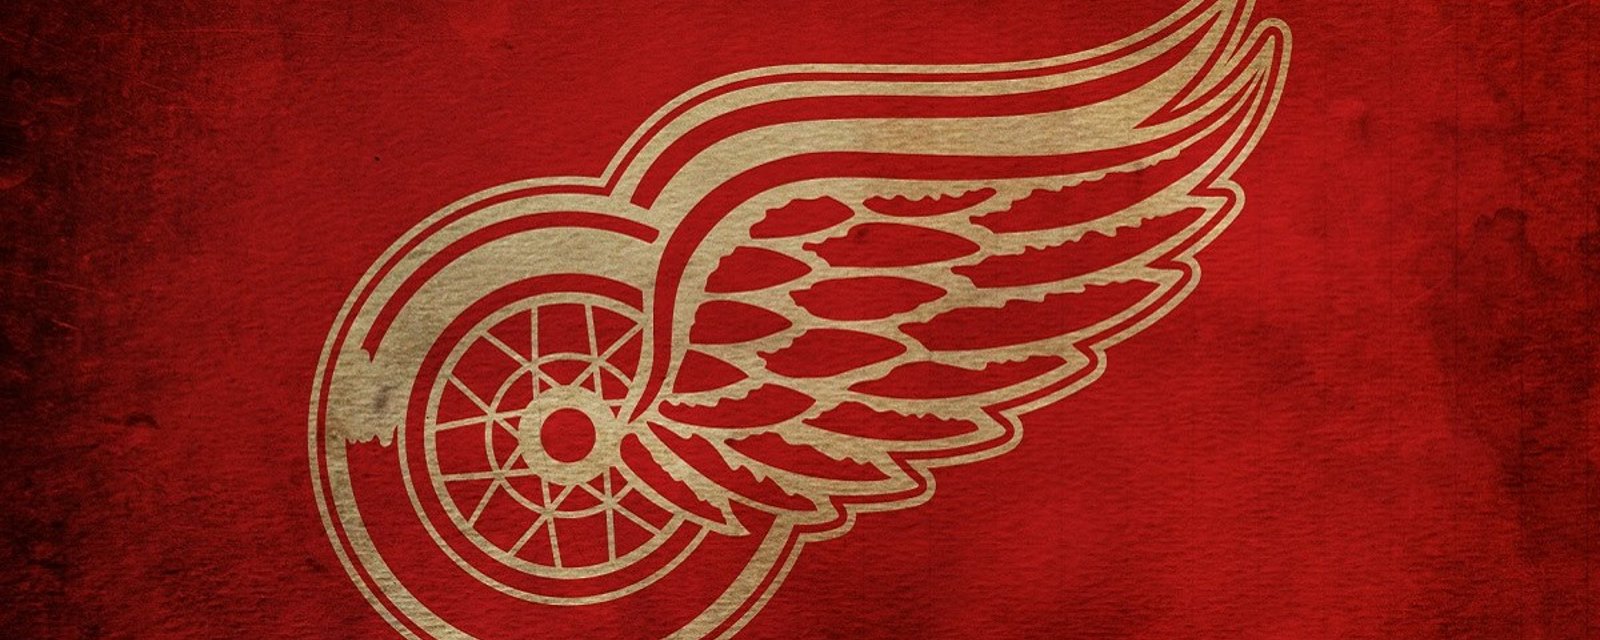 BREAKING: Red Wings Sign Player To 3-Year Deal